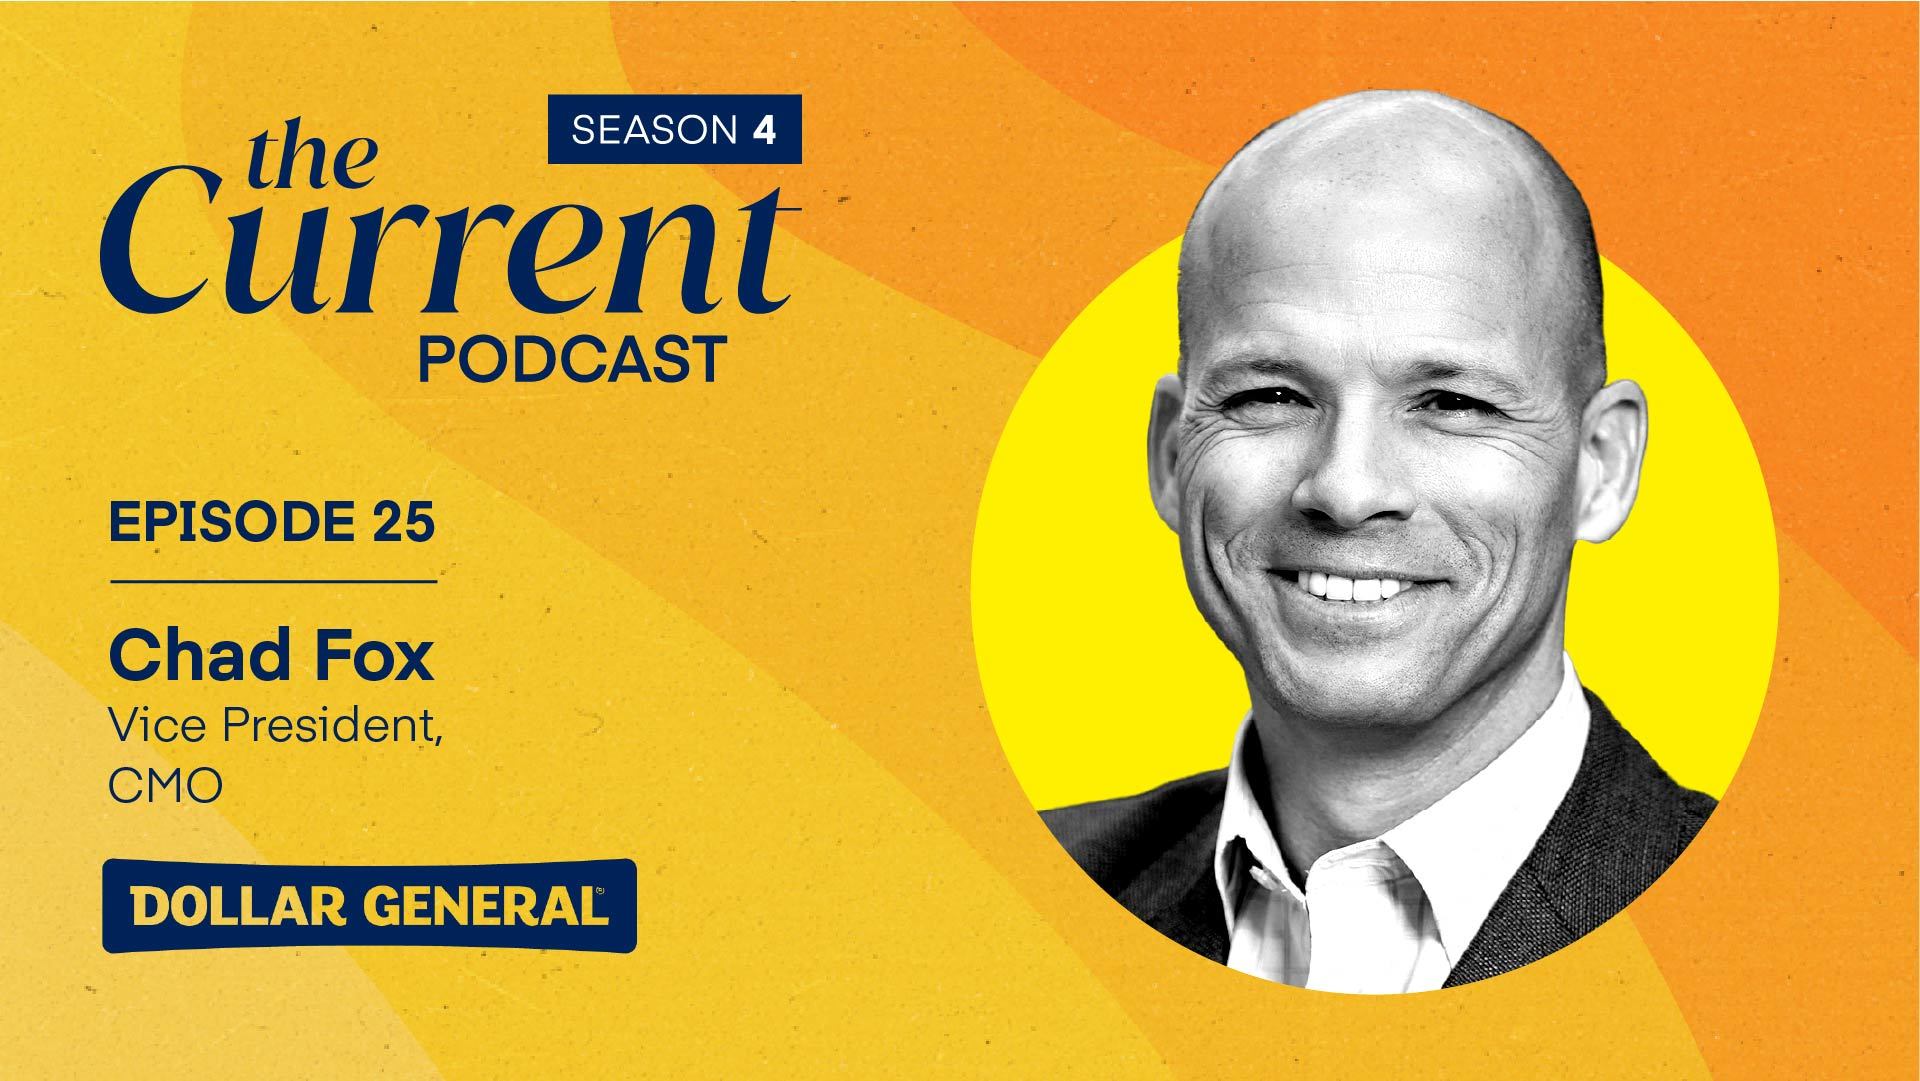 The Current Podcast: Dollar General's Chad Fox | The Current